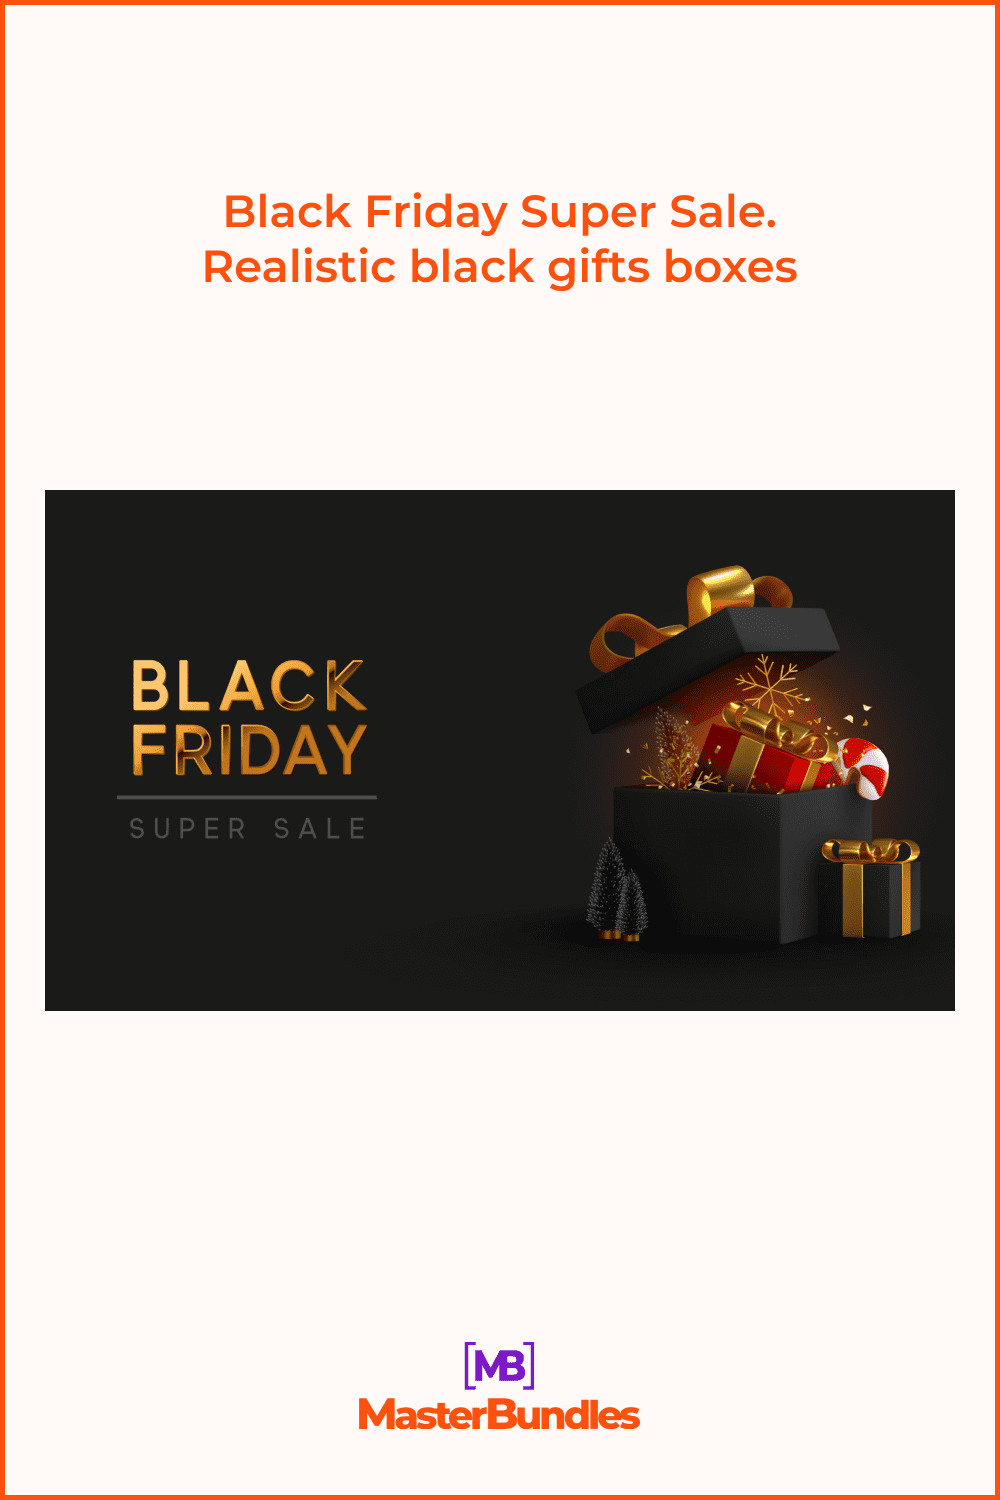 Black Friday Sale Banner with Black Gifts Boxes.